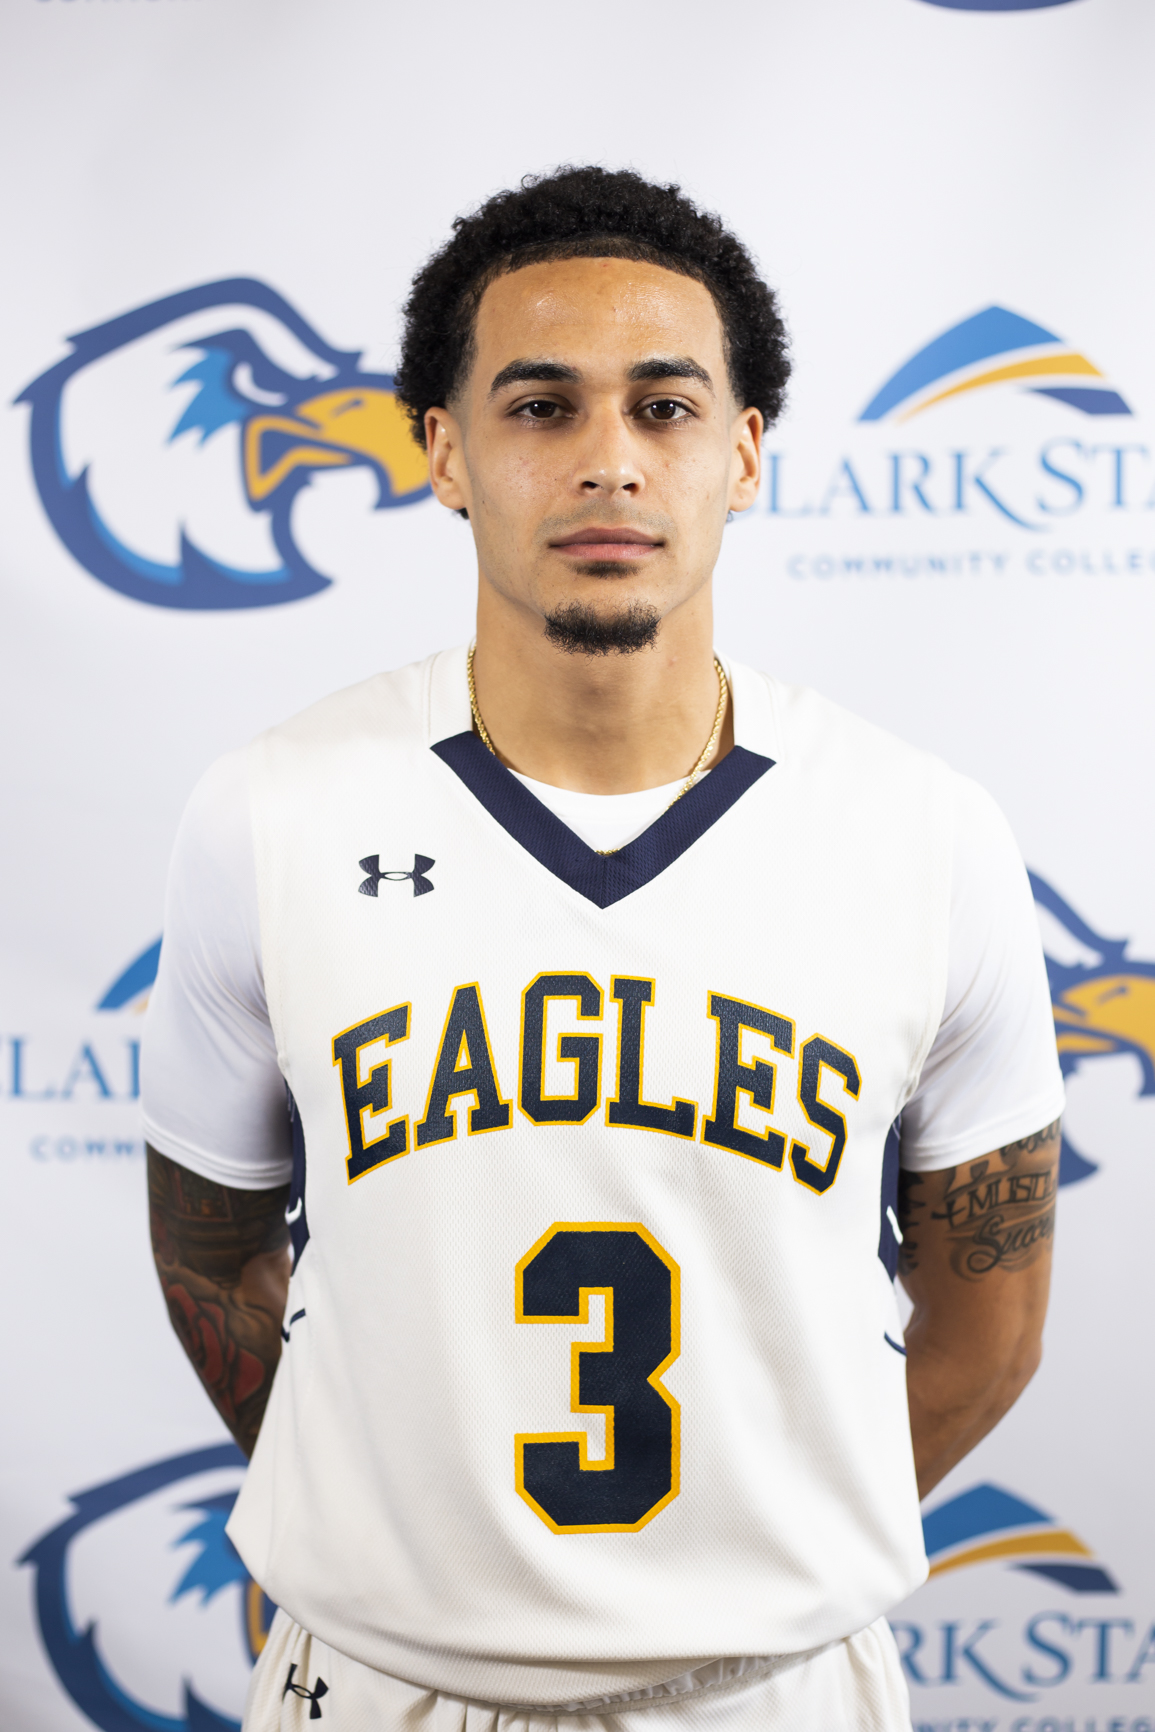 Brandon Hardin earned OCCAC Player of the Week Honors